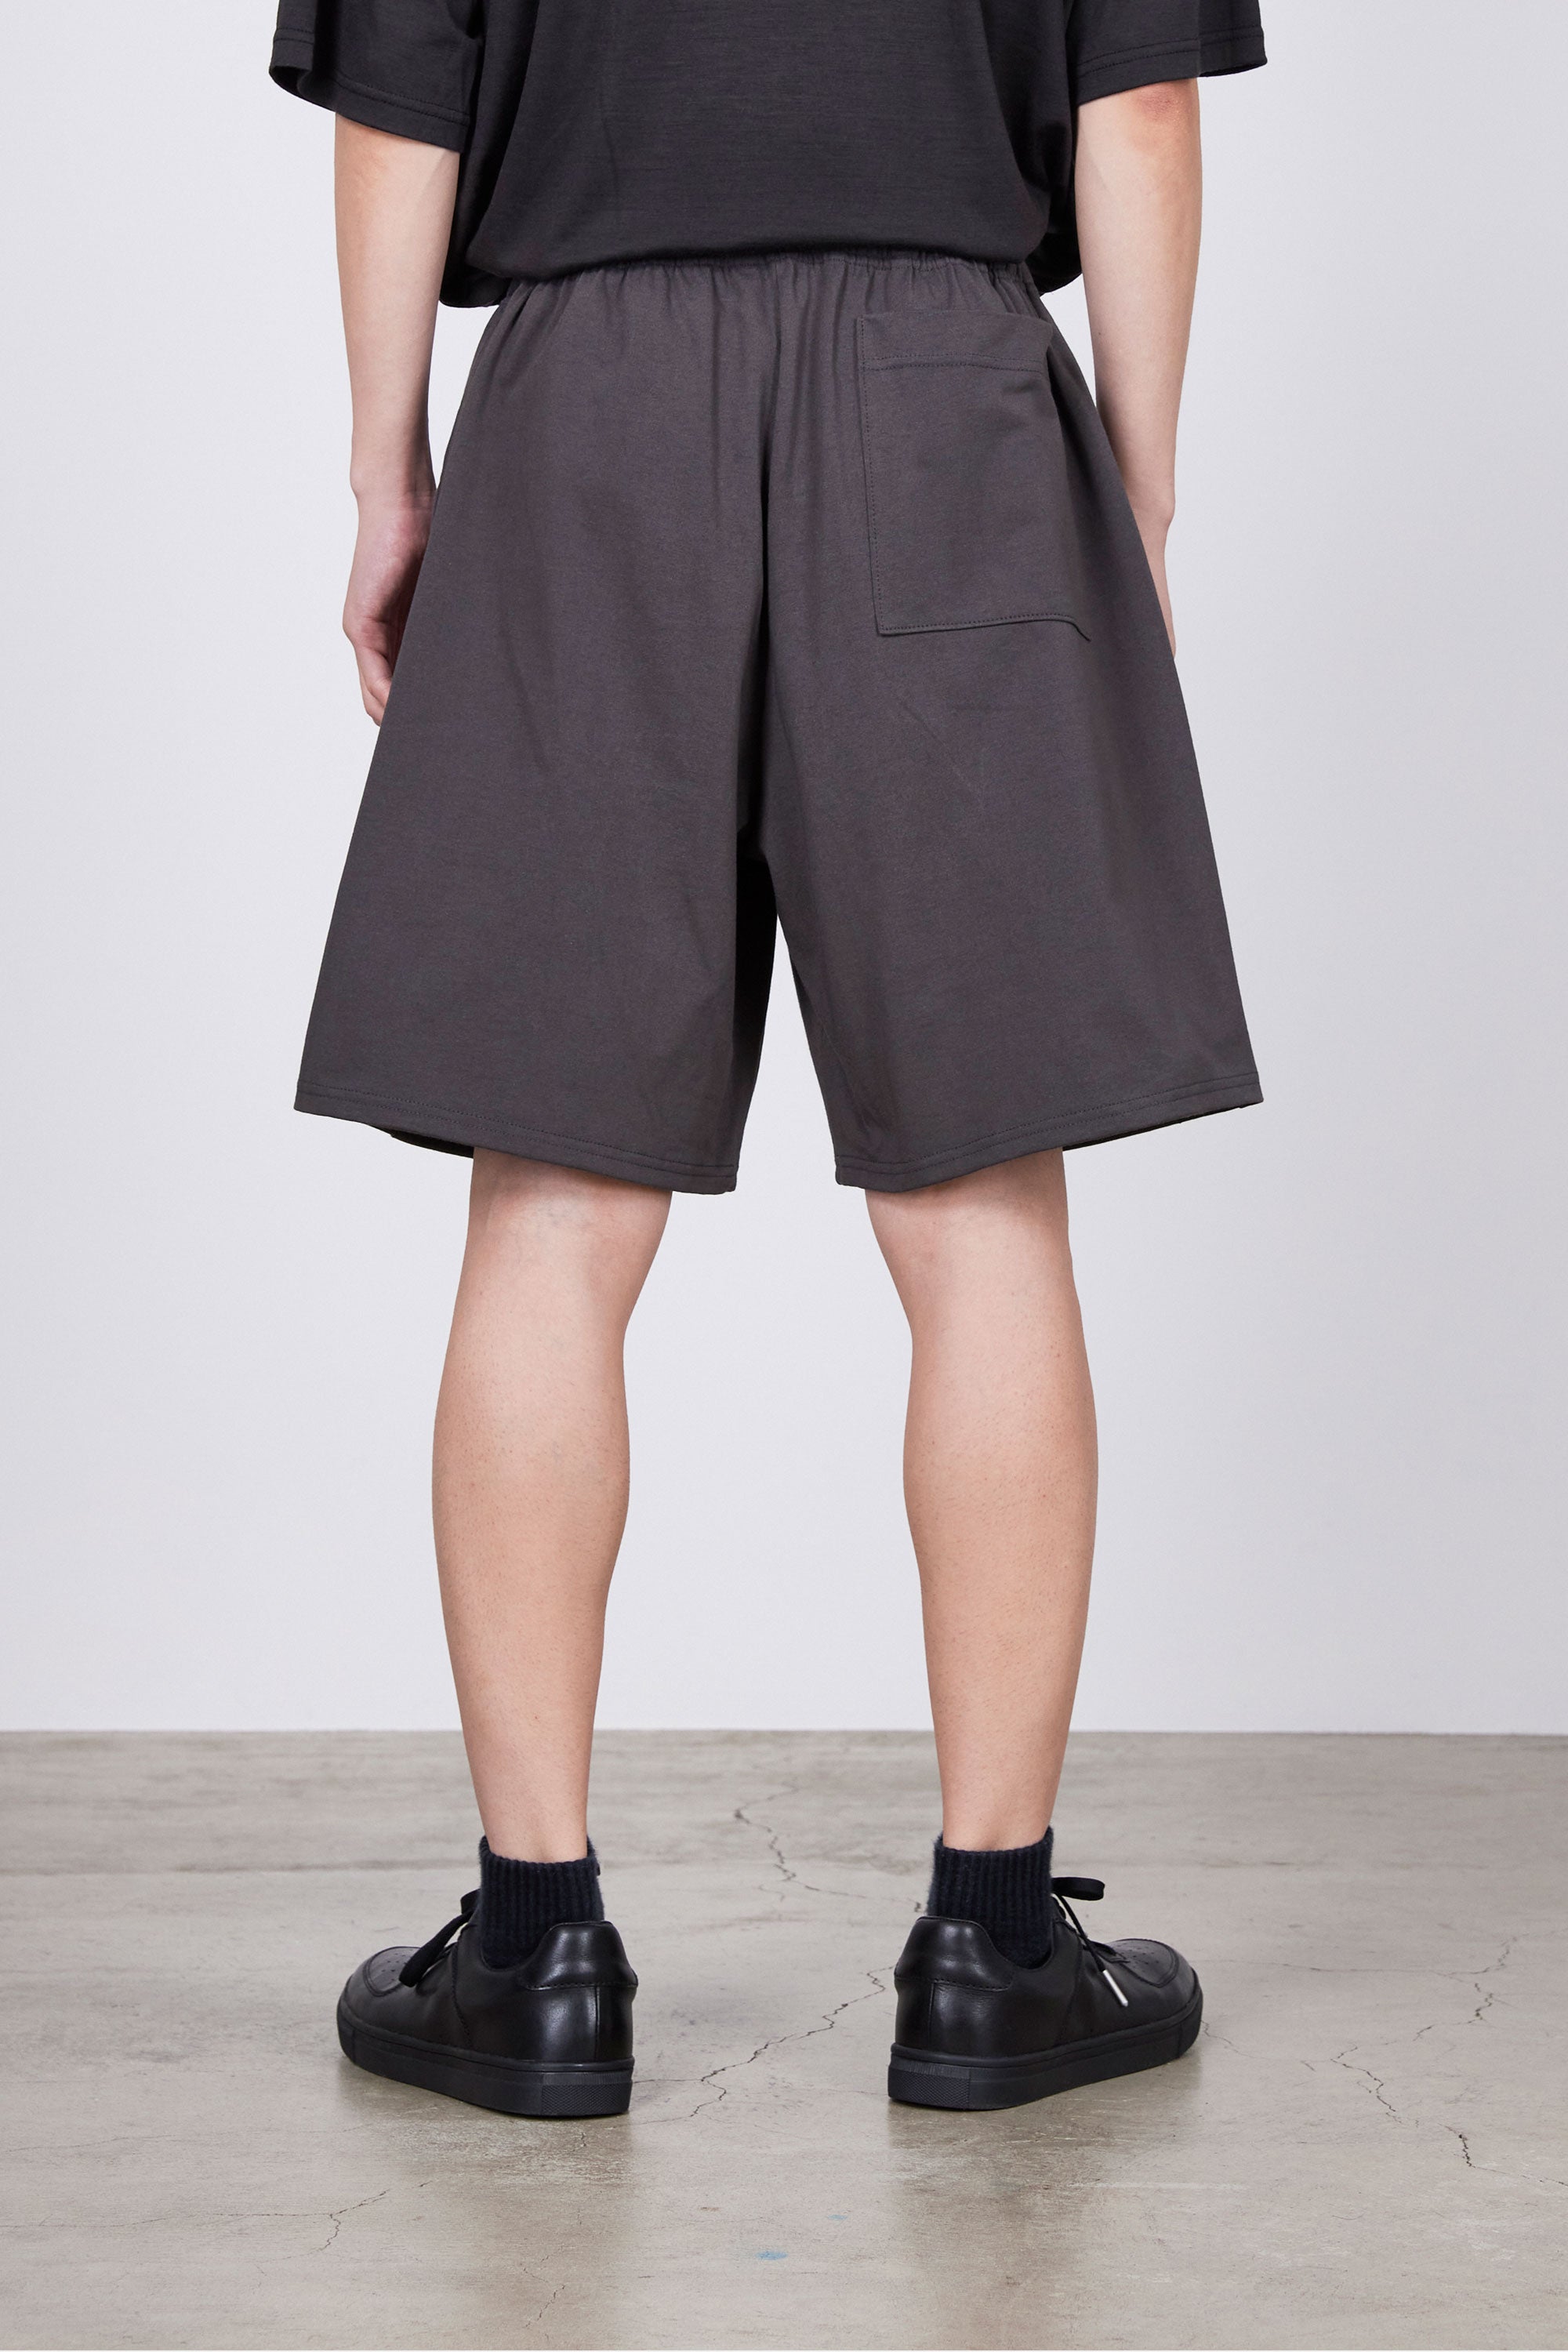 30//1 ORGANIC COTTON KNIT DOUBLE KNEE SHORTS, Charcoal